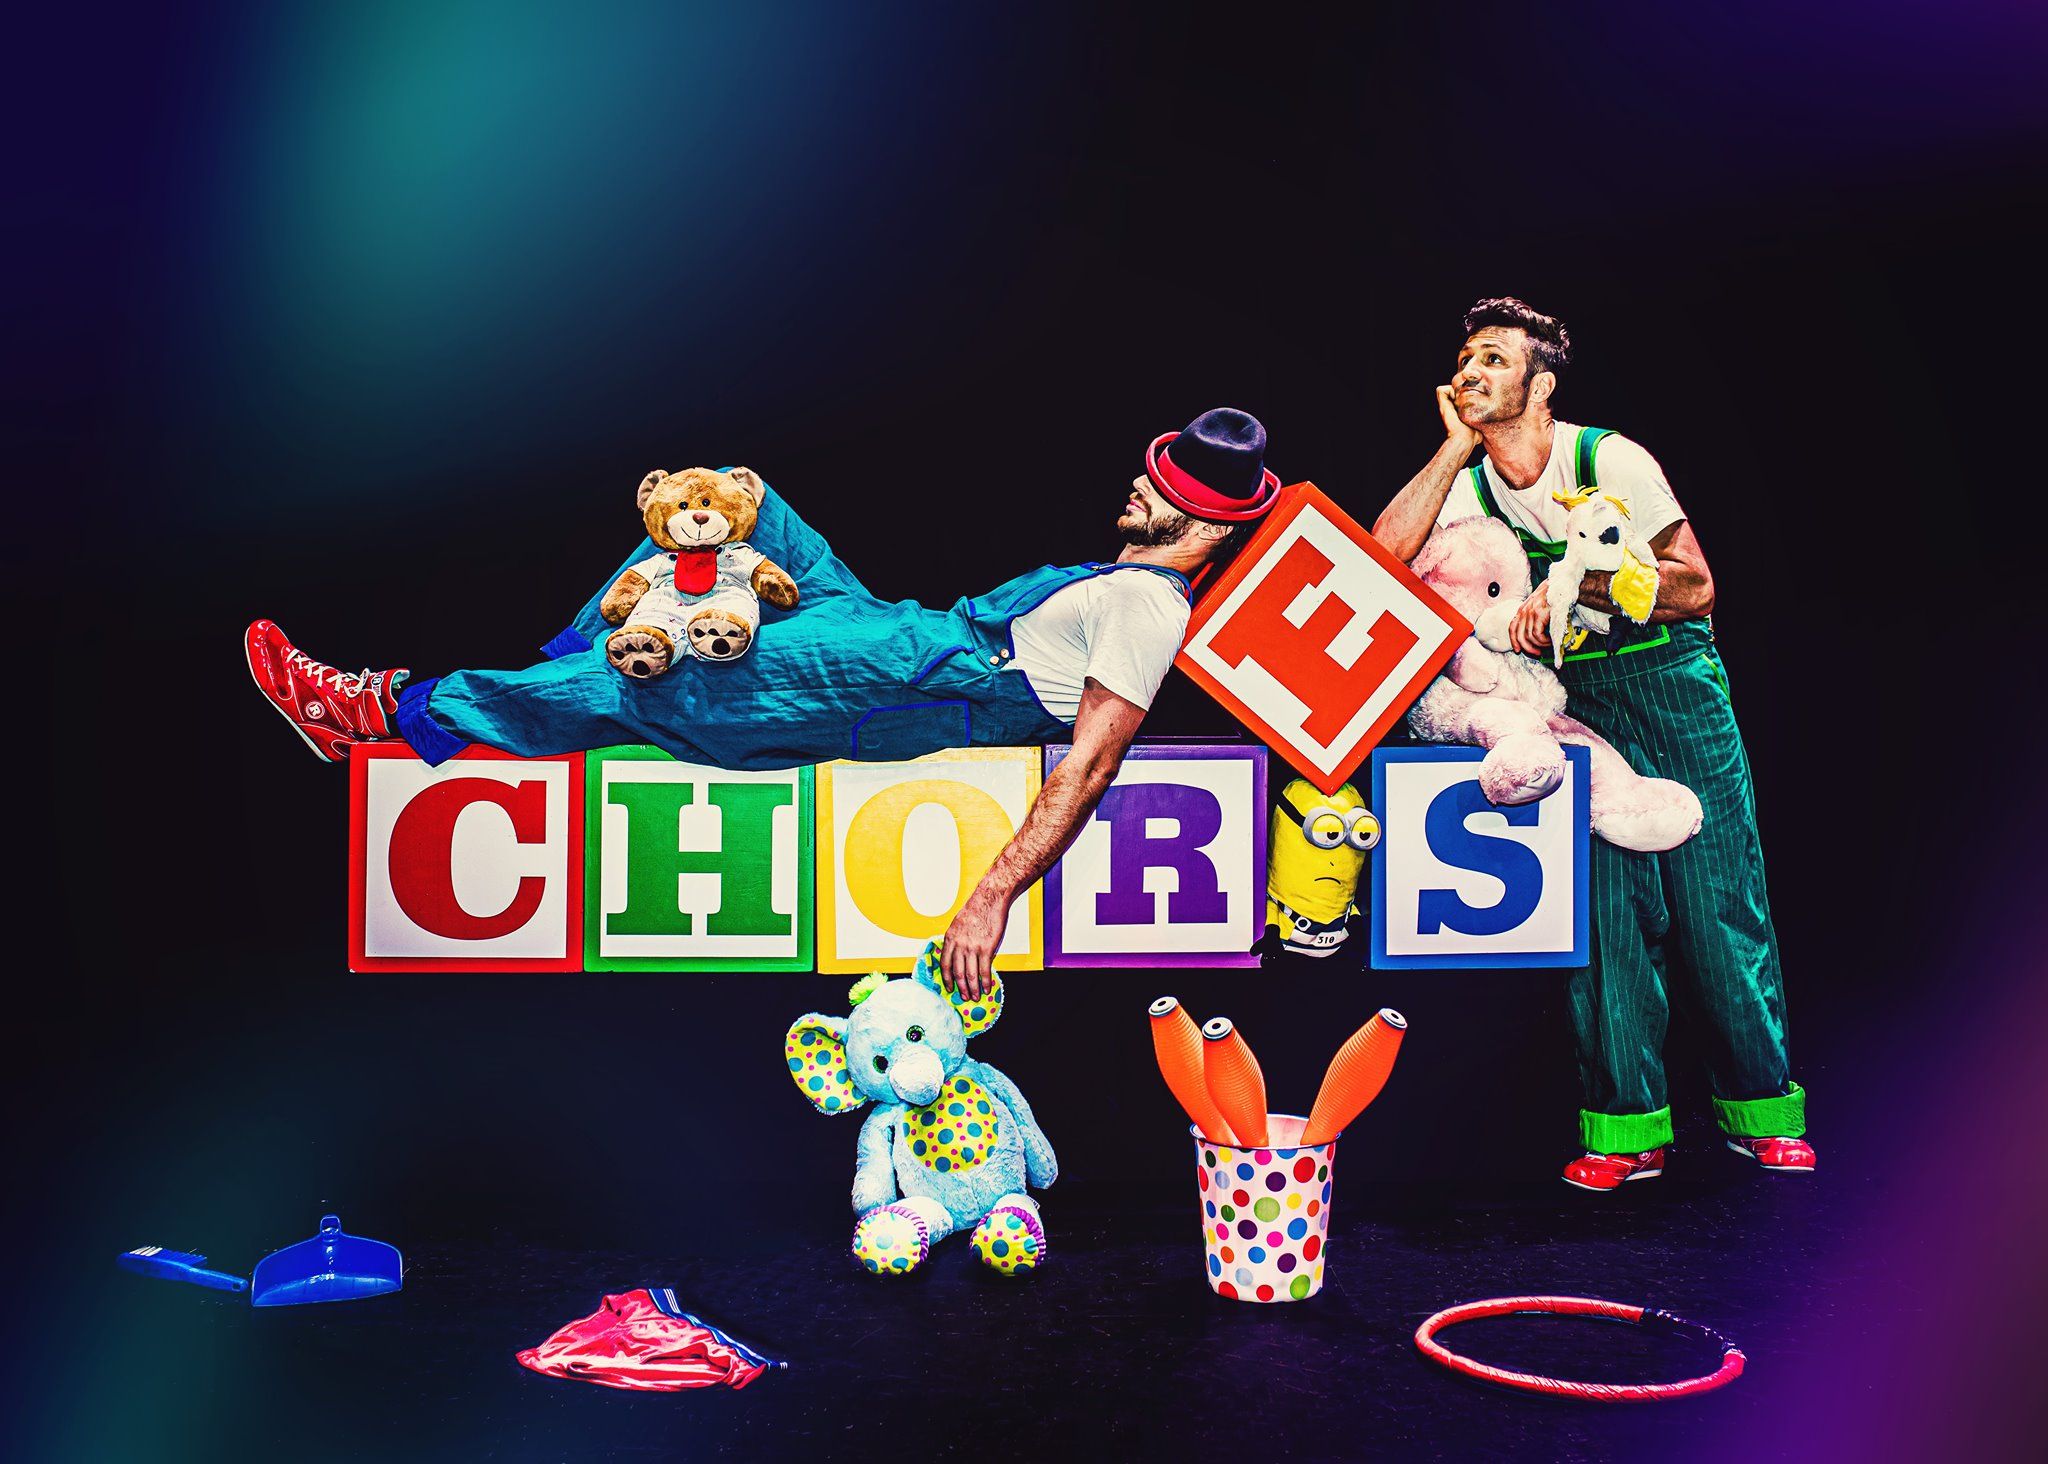 There is very little spoken dialogue with just skilled stunts and uproaring involving interactive gags. Get Chores tickets.